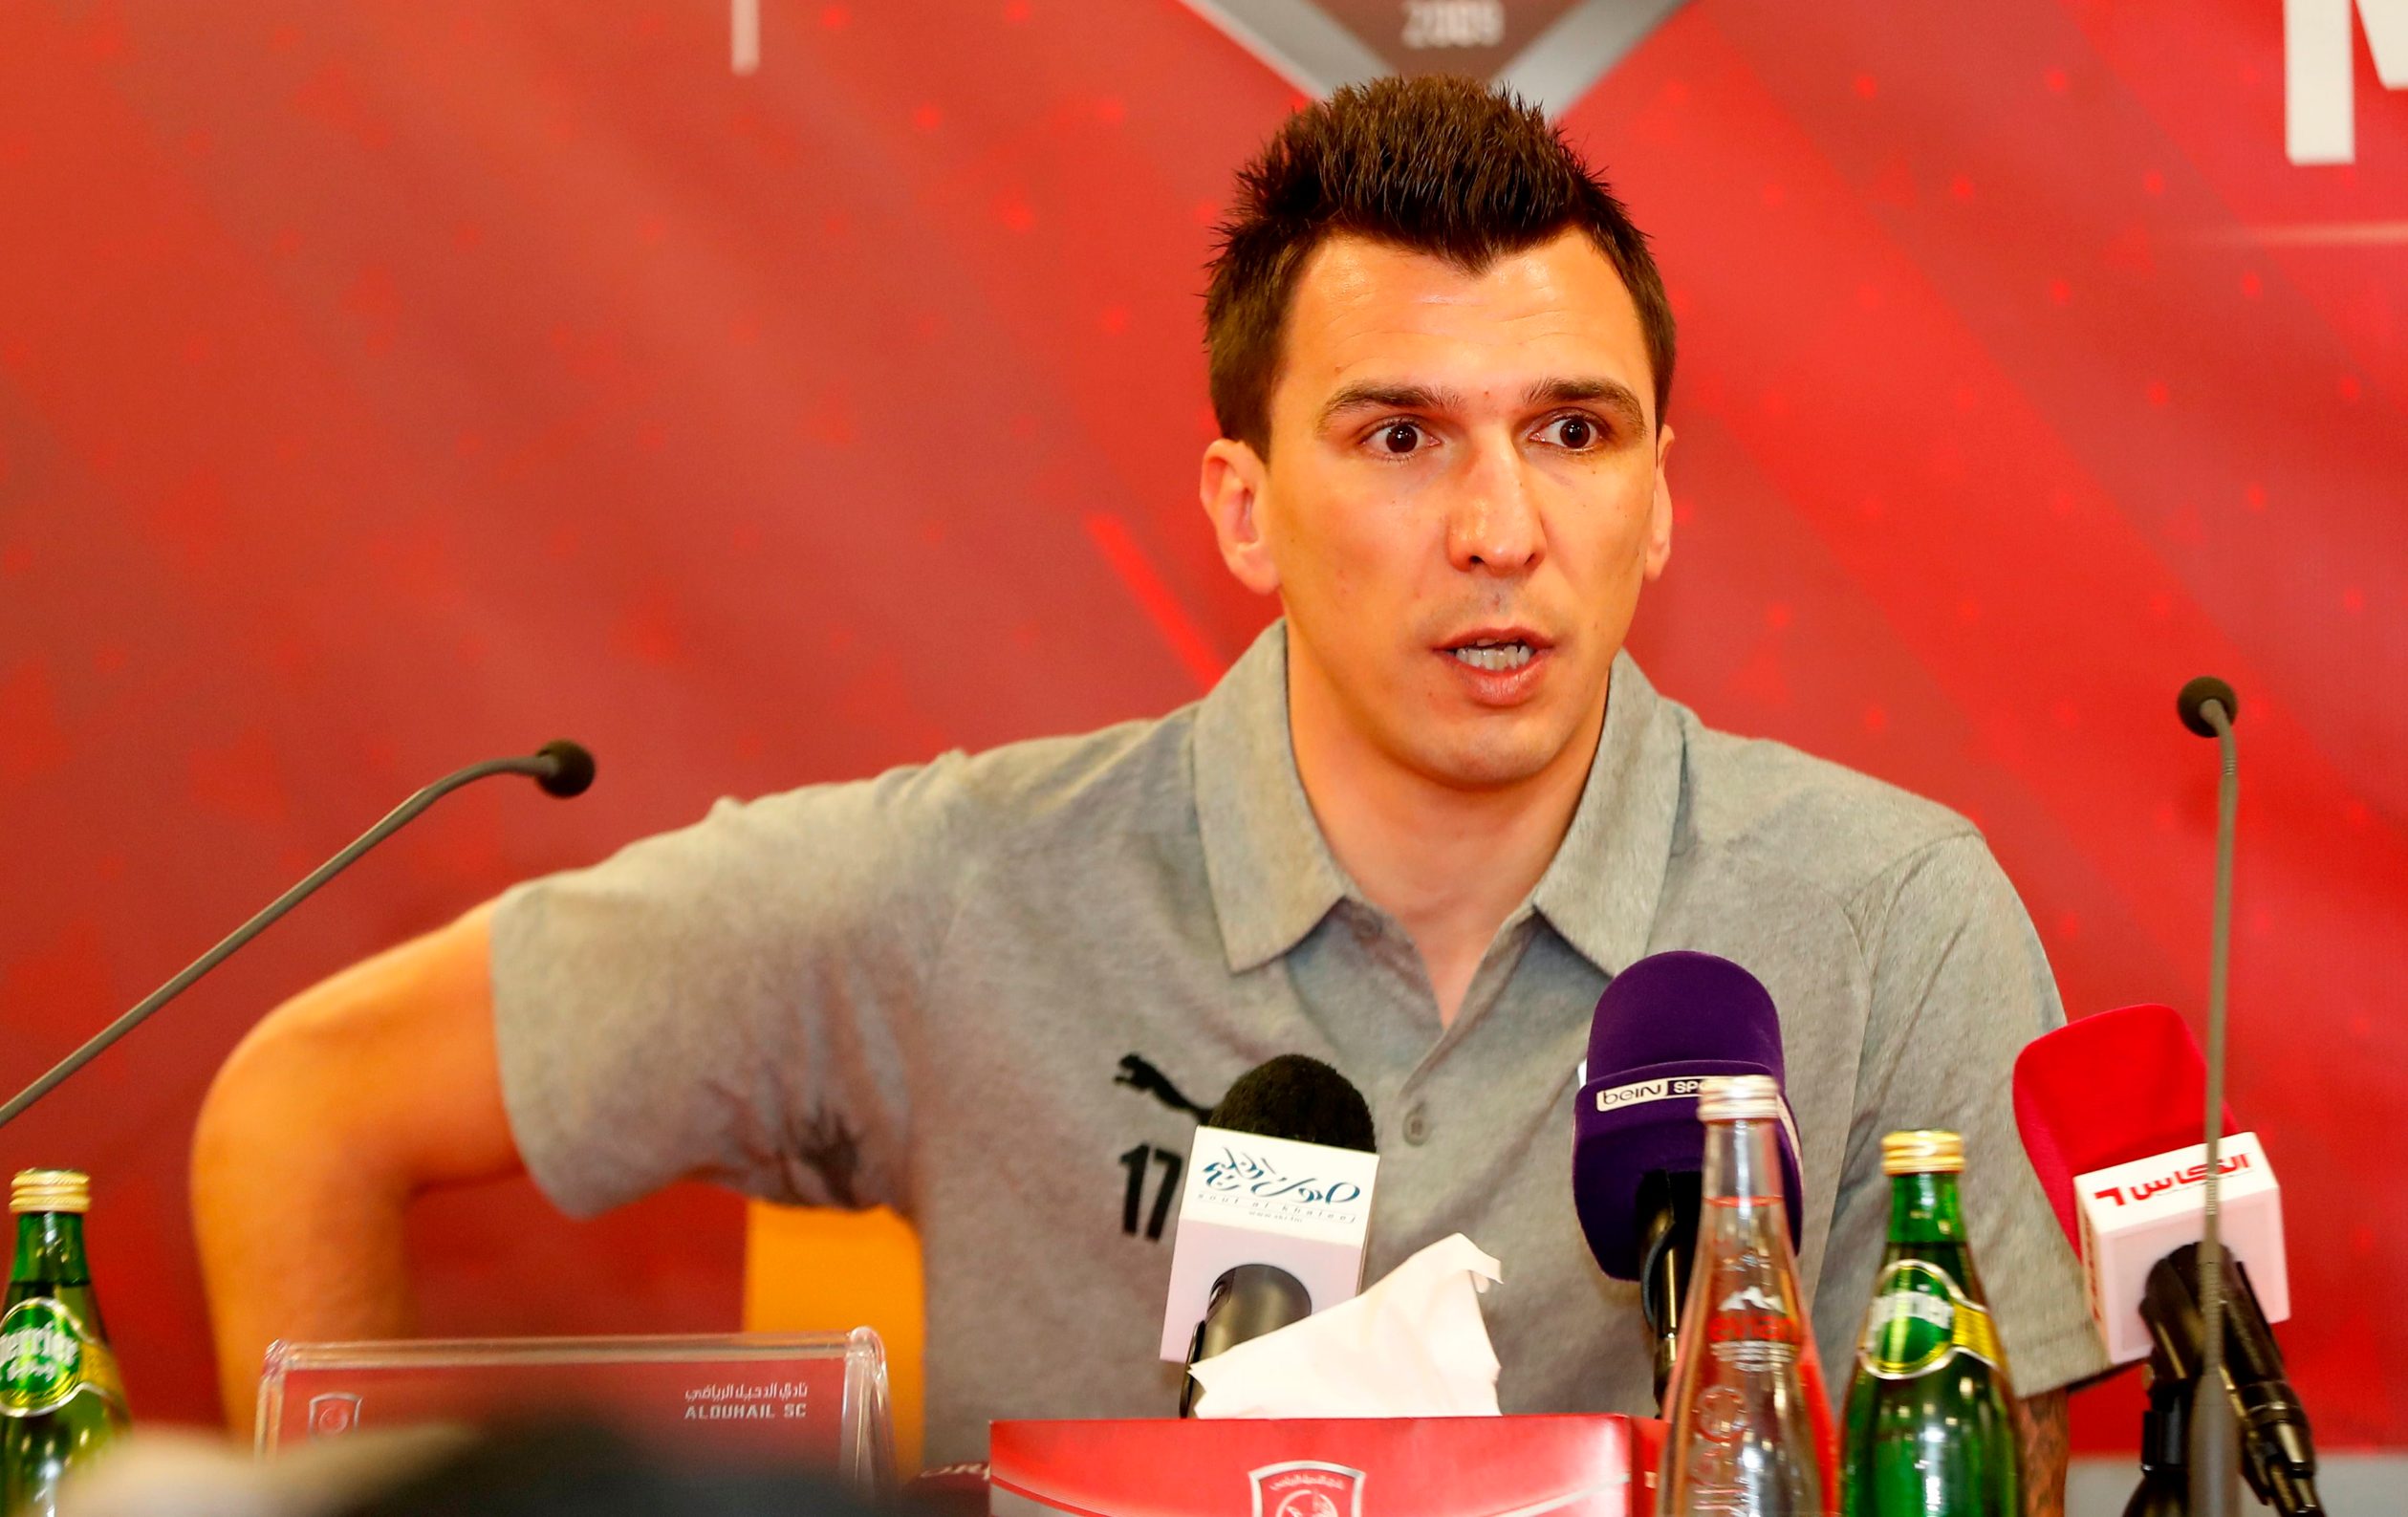 Croatian forward Mario Mandzukic speaks to the press during his introduction as a new player for Qatar's Al Duhail football team on January 2, 2020, in the Qatari capital Doha. - Mandzukic had previously played for Germany's Bayern Munich, Spain's Atletico Madrid and Italy's Juventus before signing for the Qatar club. (Photo by KARIM JAAFAR / AFP)